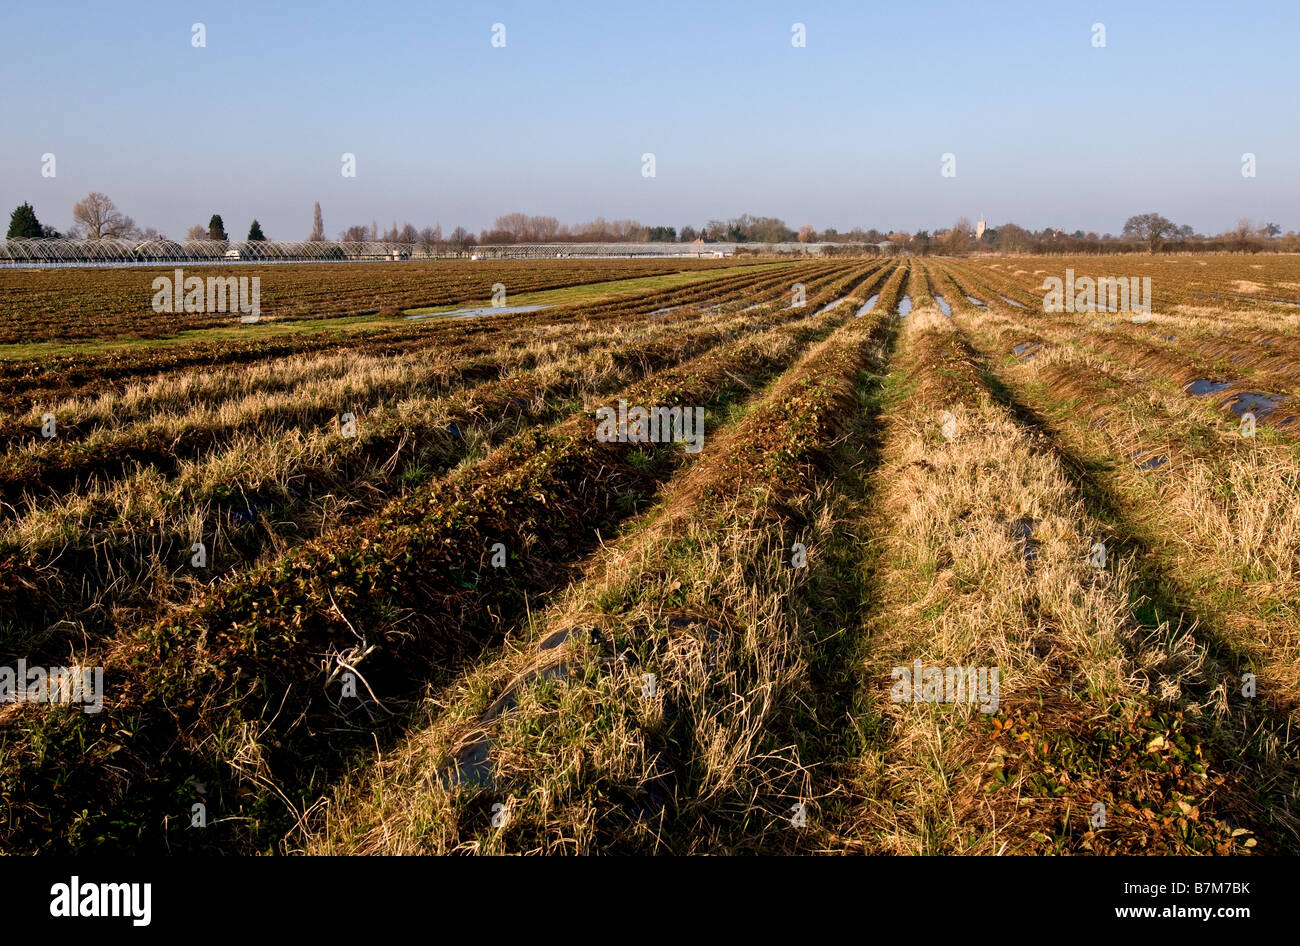 Furrows in a field Stock Photo